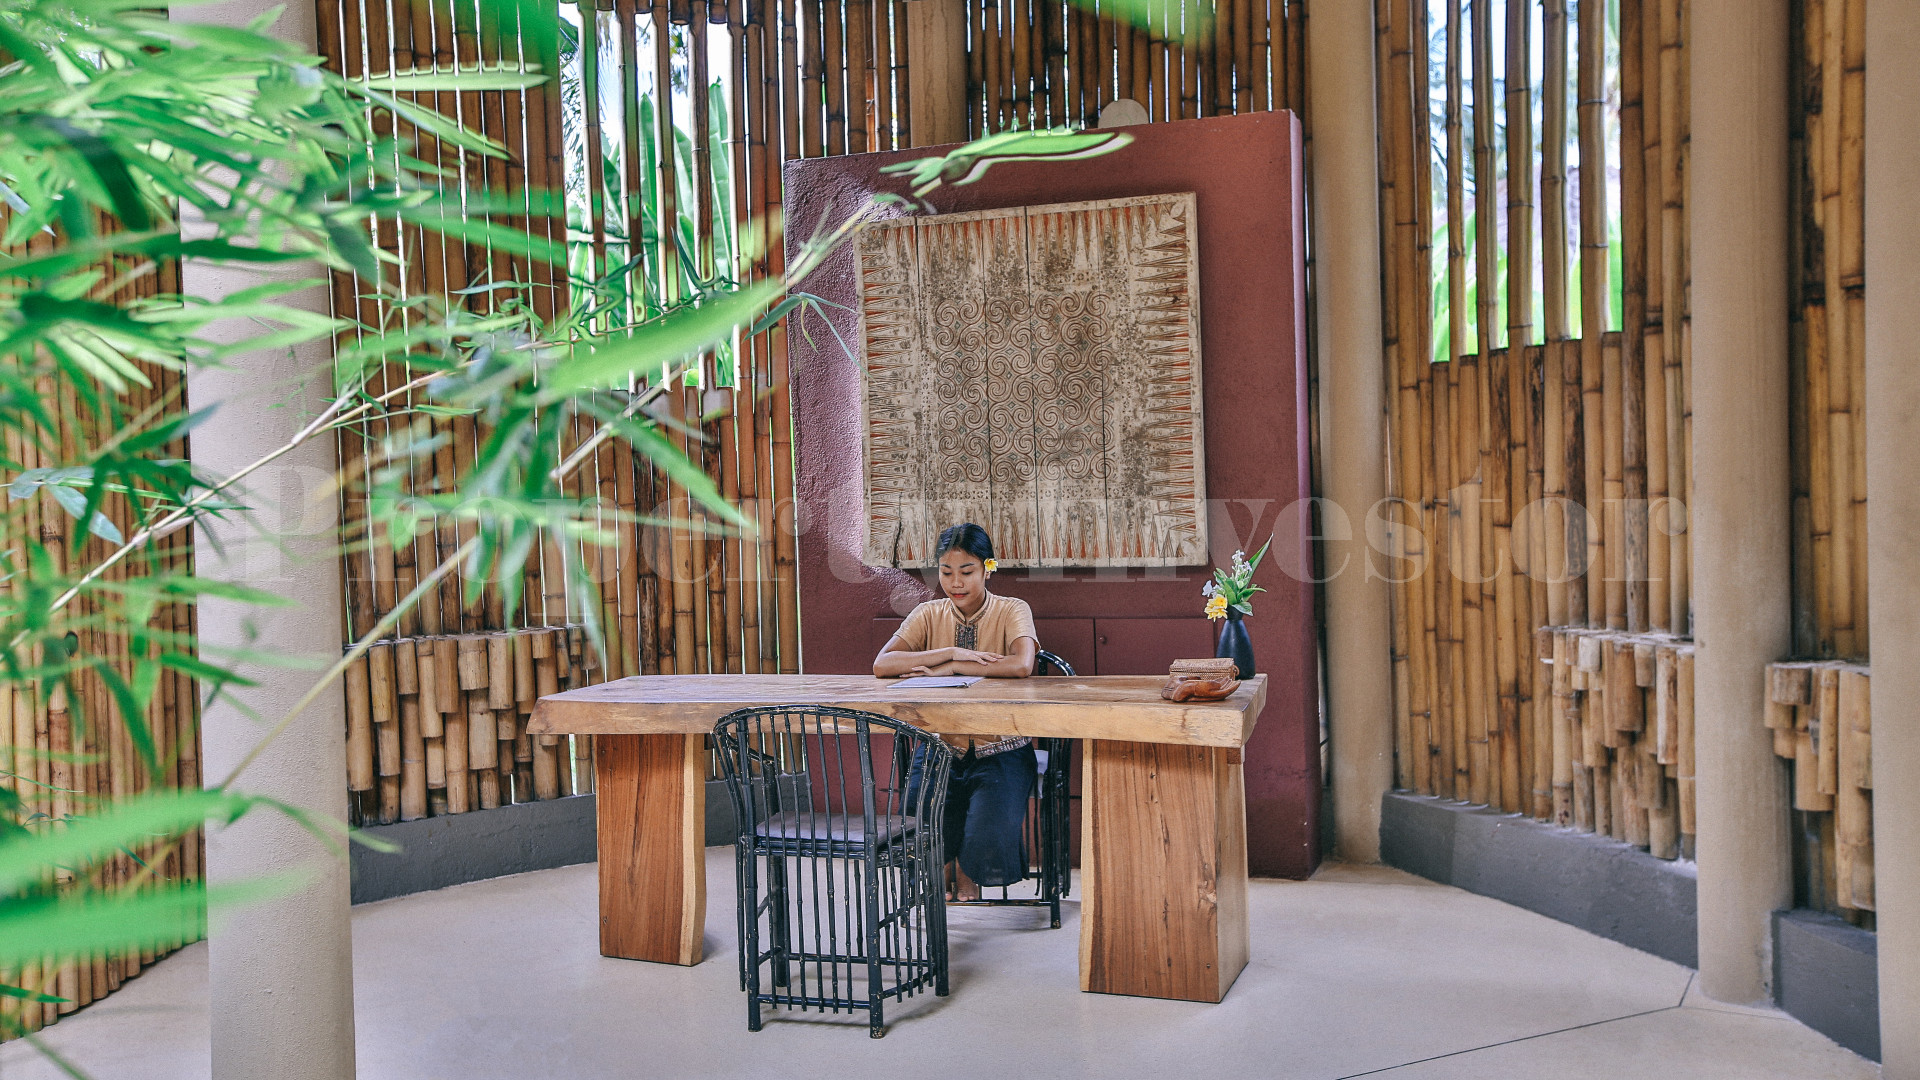 Turnkey 5* Star Boutique Hotel with 10 Modern Villas in the Gili Islands, Lombok